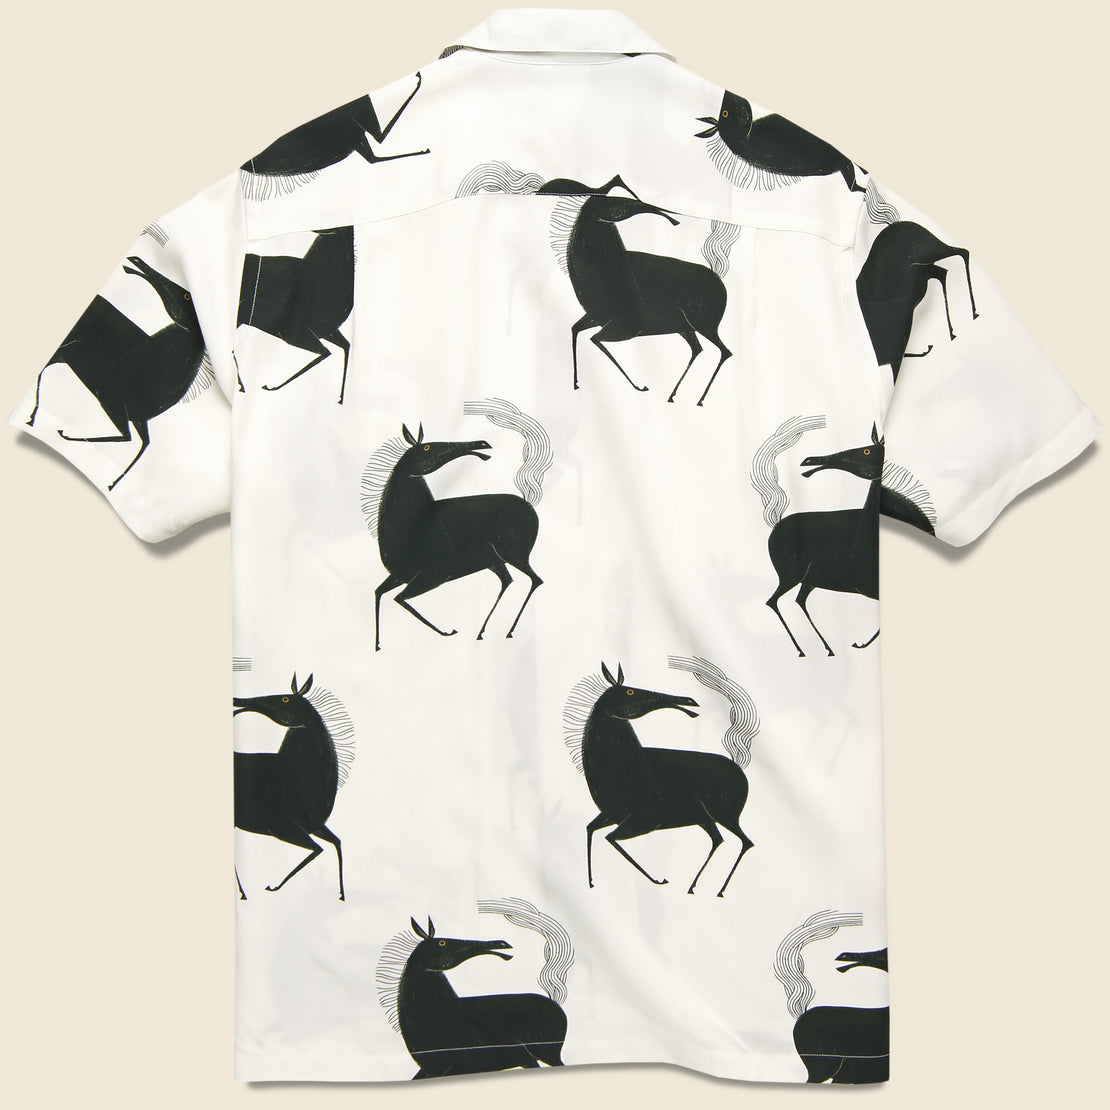 Horse Camp Shirt - White/Black - Portuguese Flannel - STAG Provisions - Tops - S/S Woven - Other Pattern